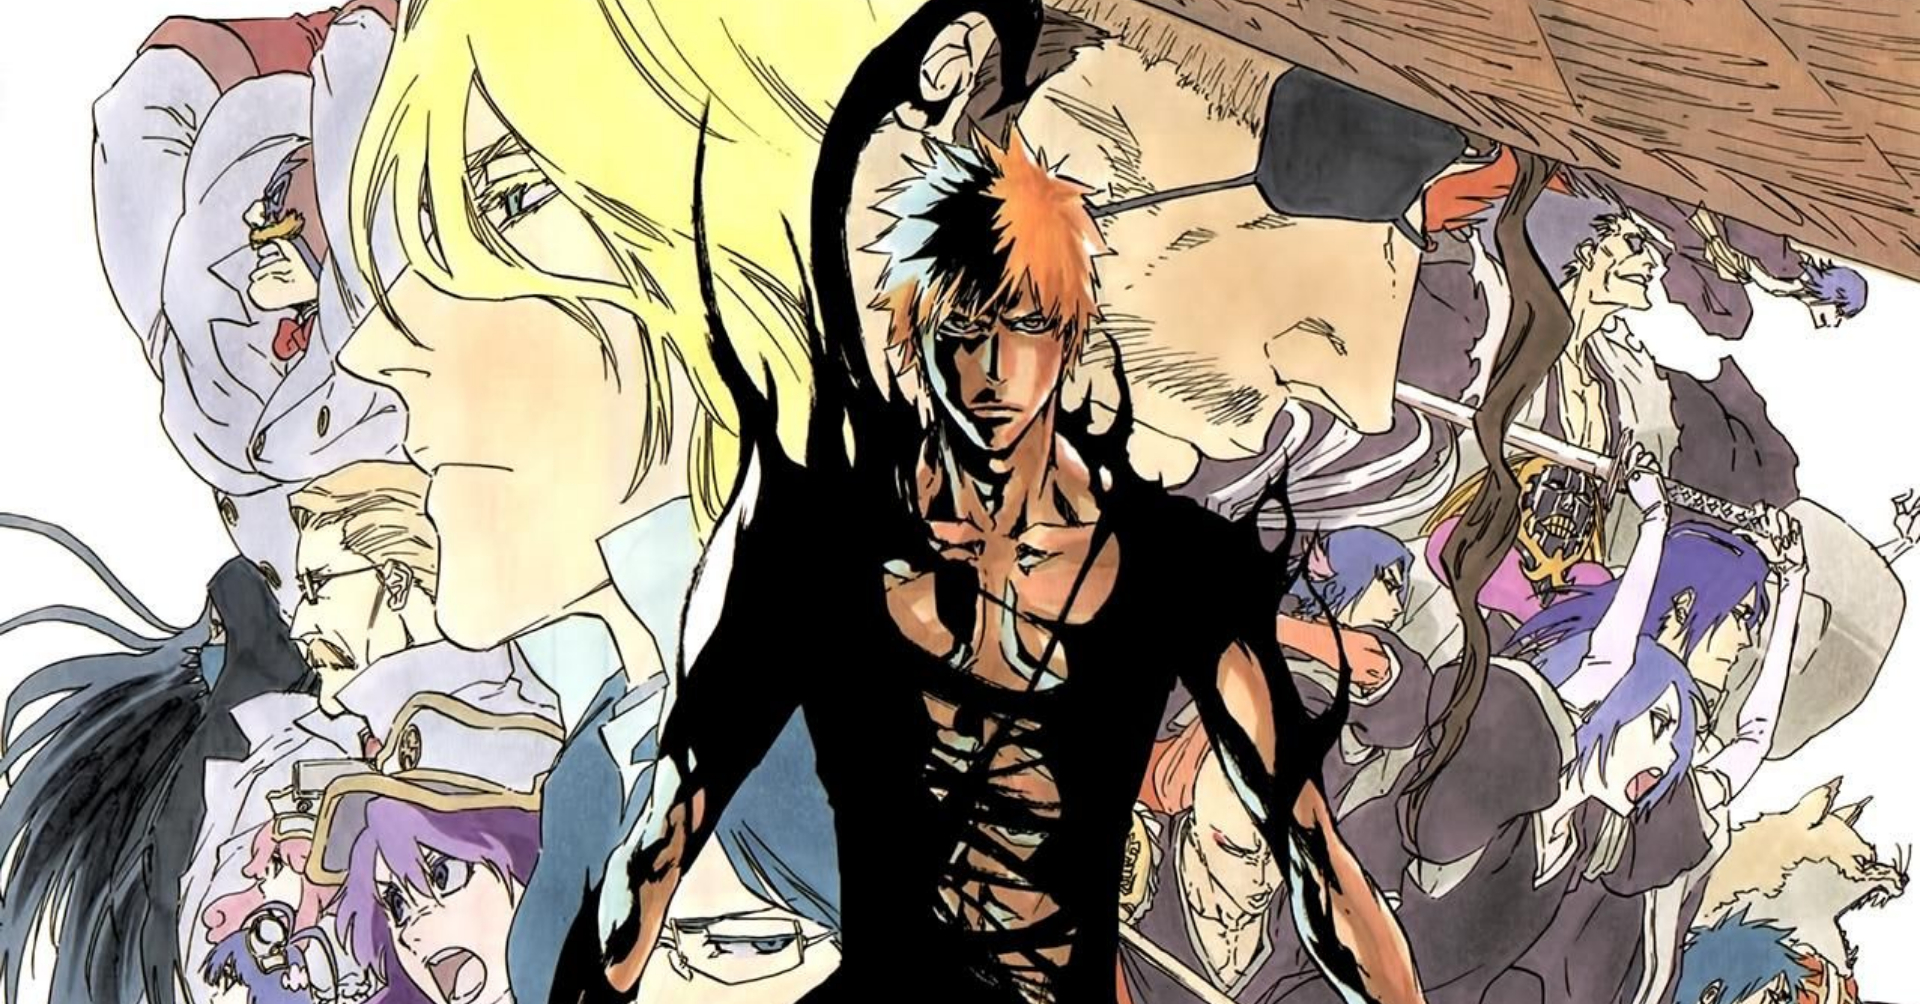 Bleach Thousand Year Blood War anime: Release, story, more